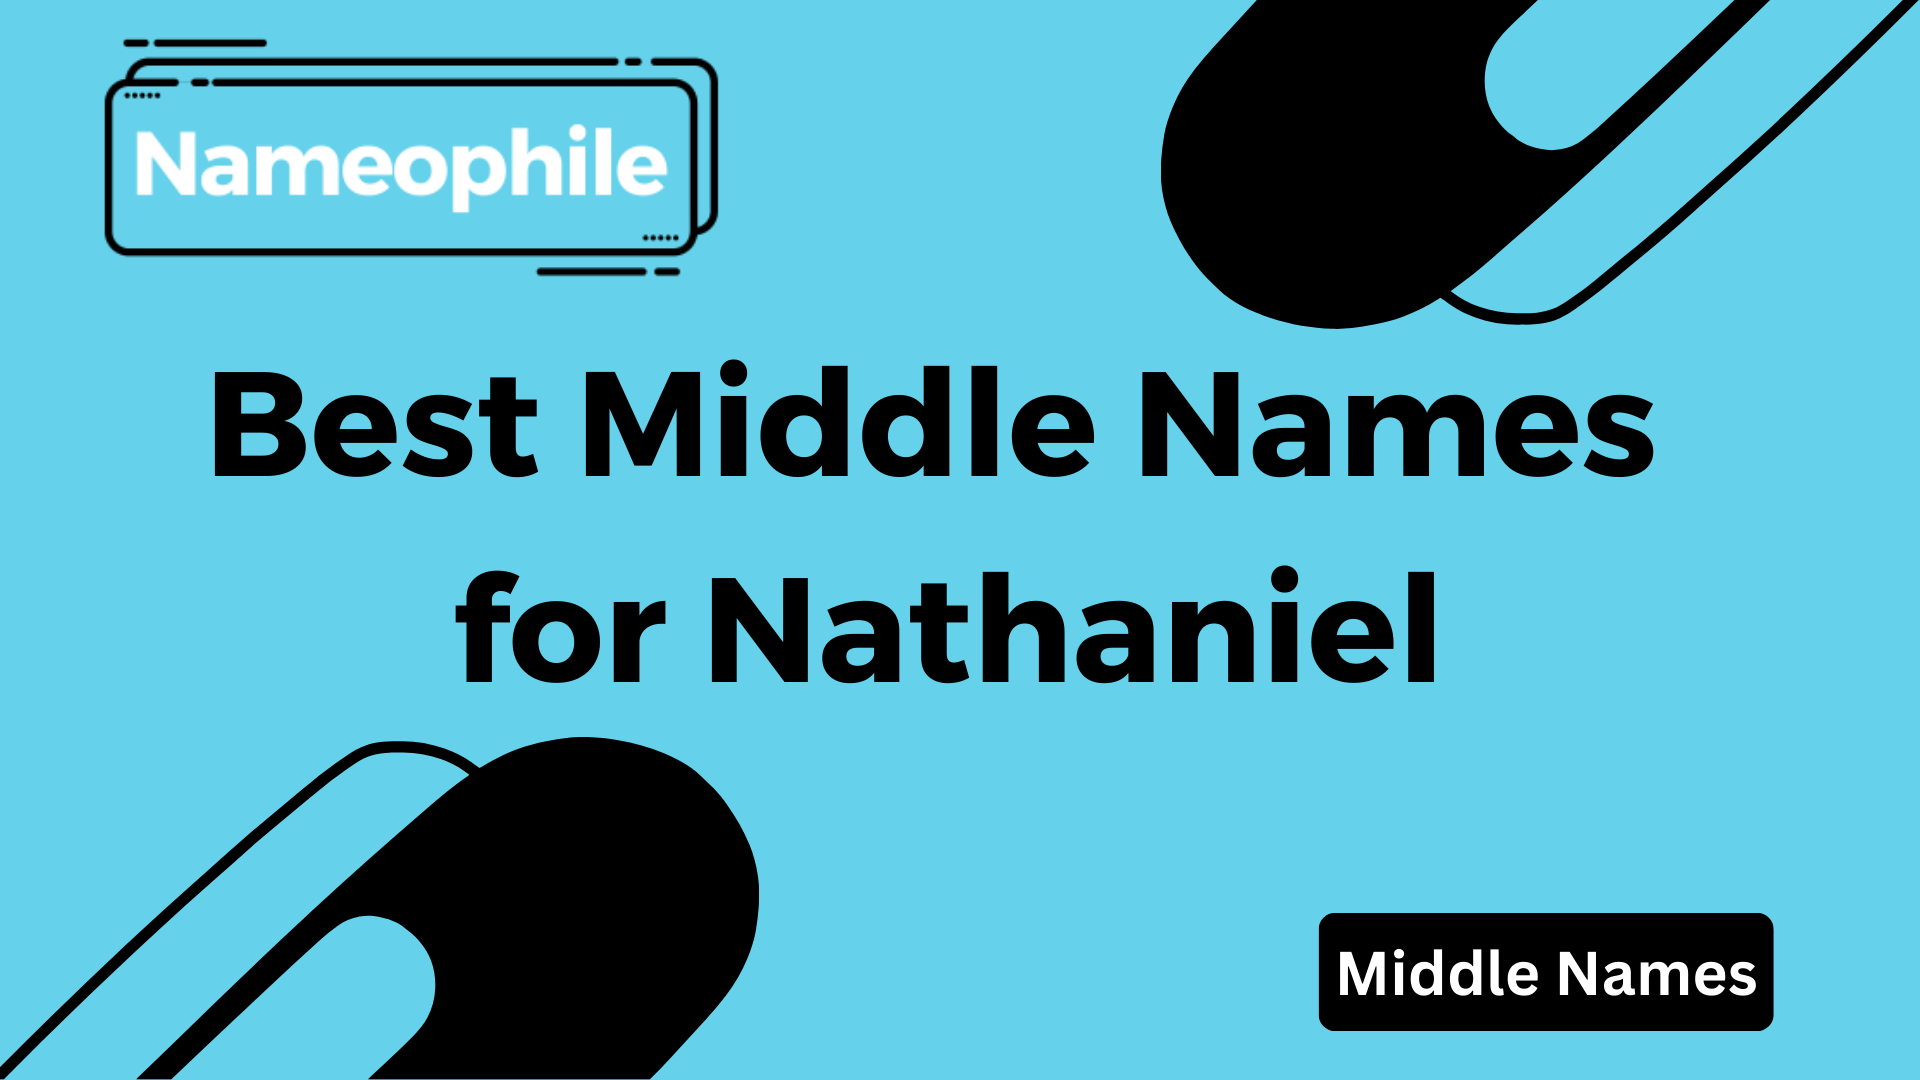 Best Middle Names for Nathaniel